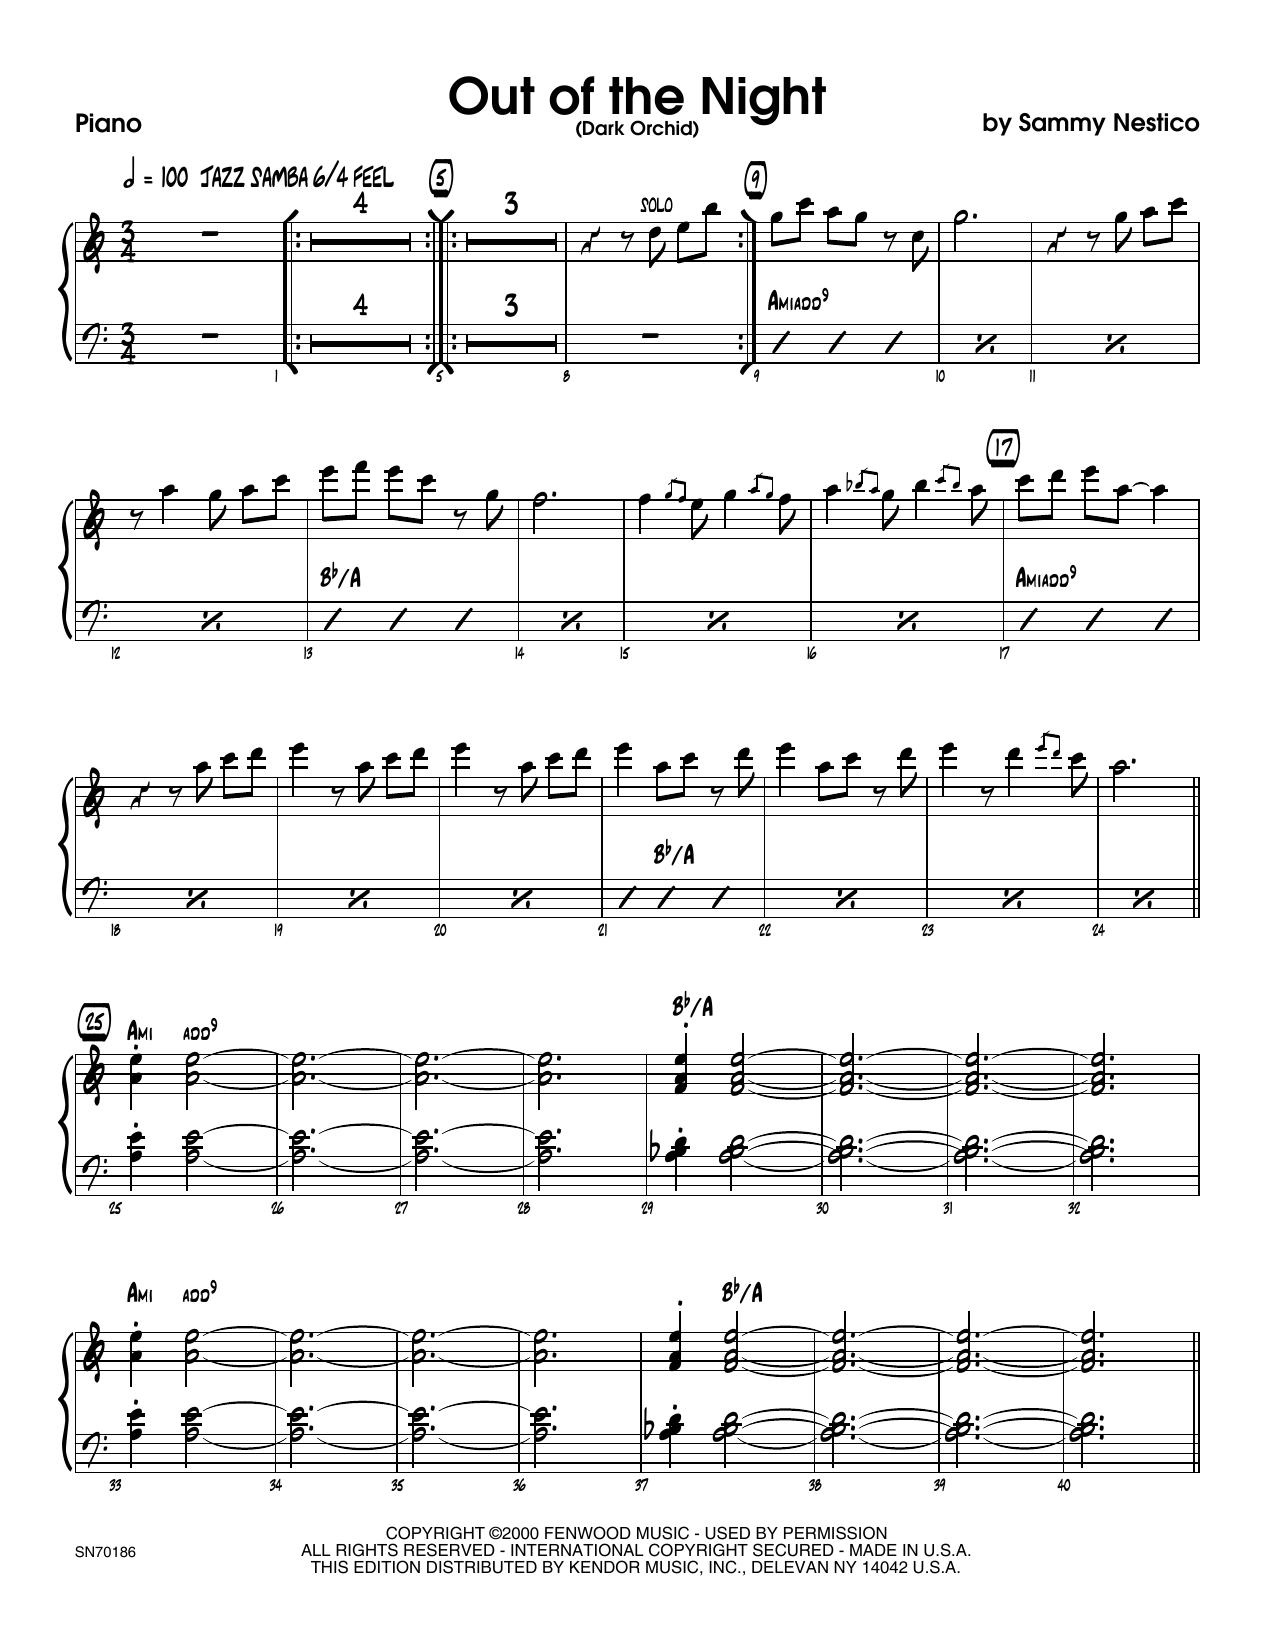 Download Sammy Nestico Out of the Night - Piano Sheet Music